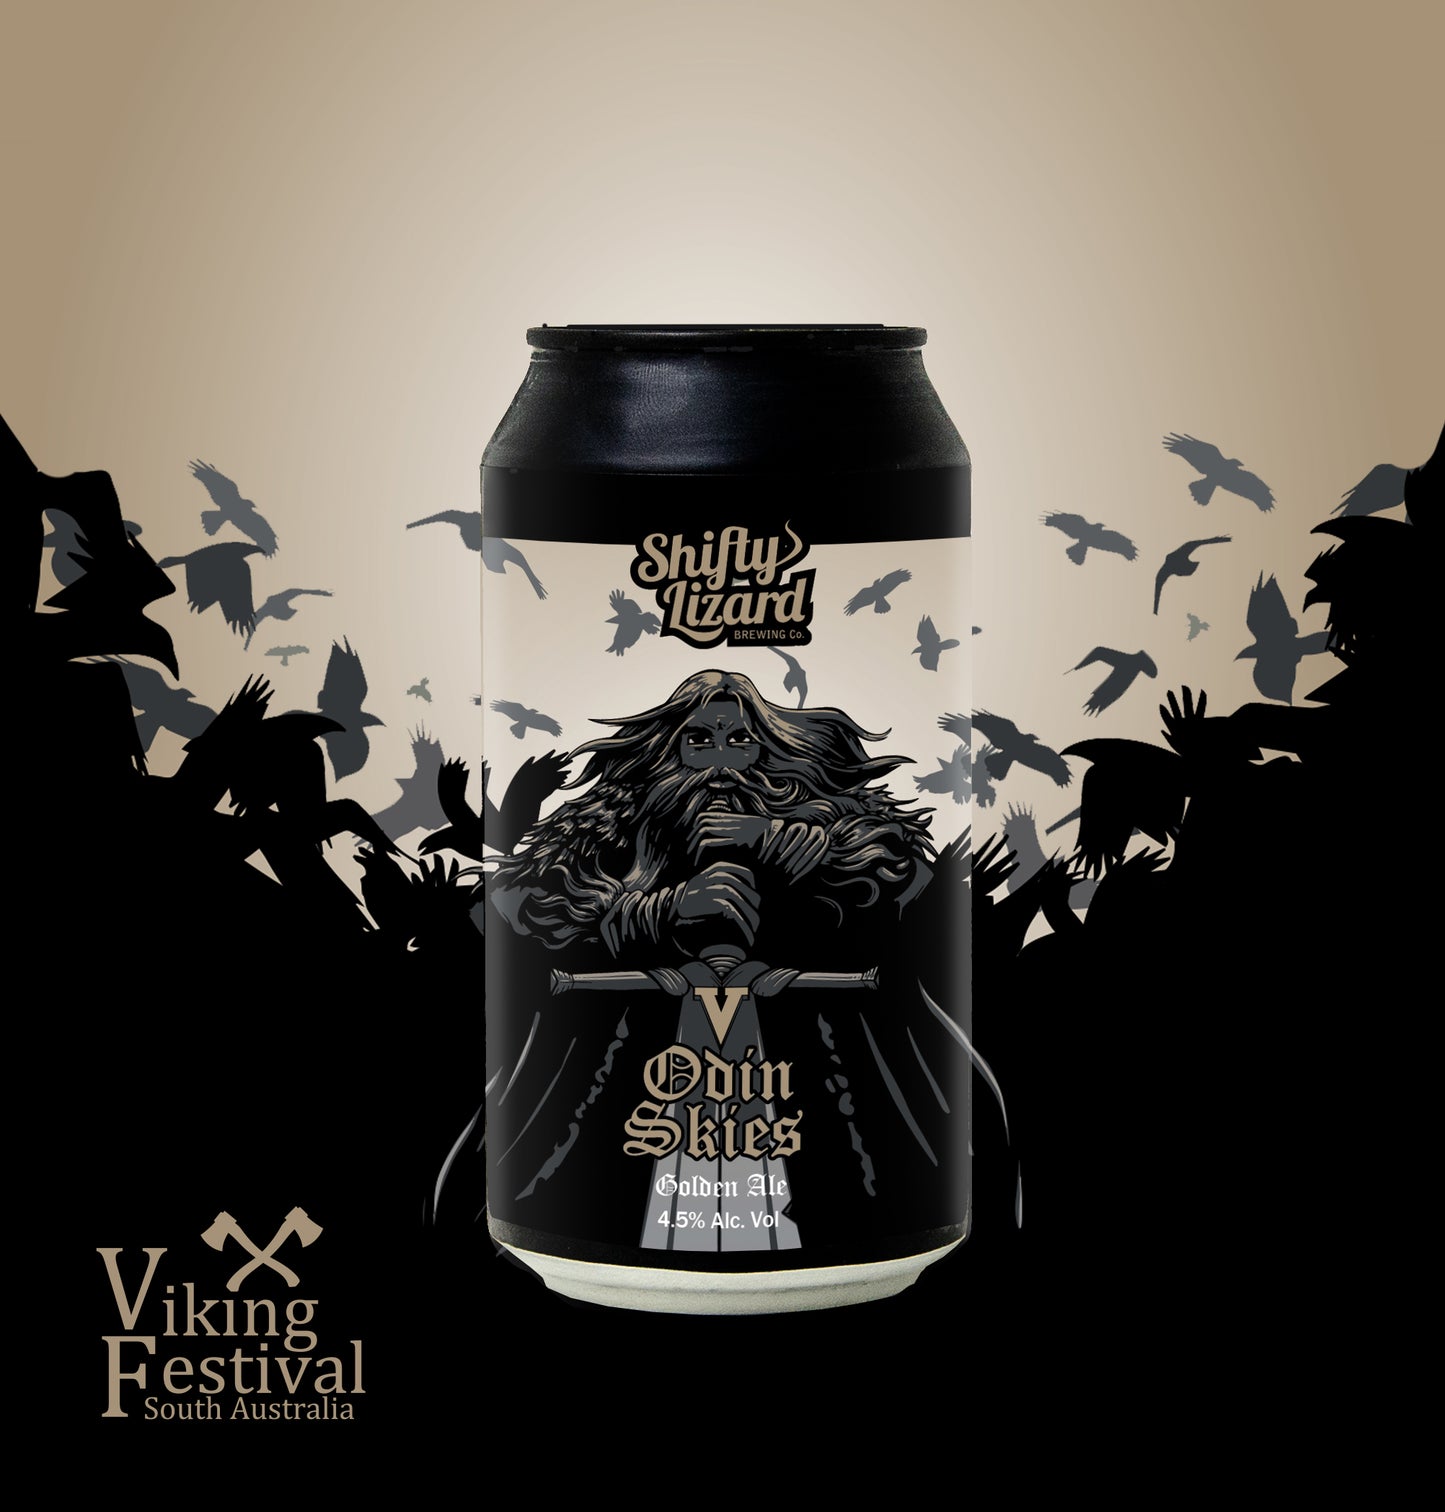 Odin Skies Golden Ale - Limited Release collaboration with SA Viking Festival